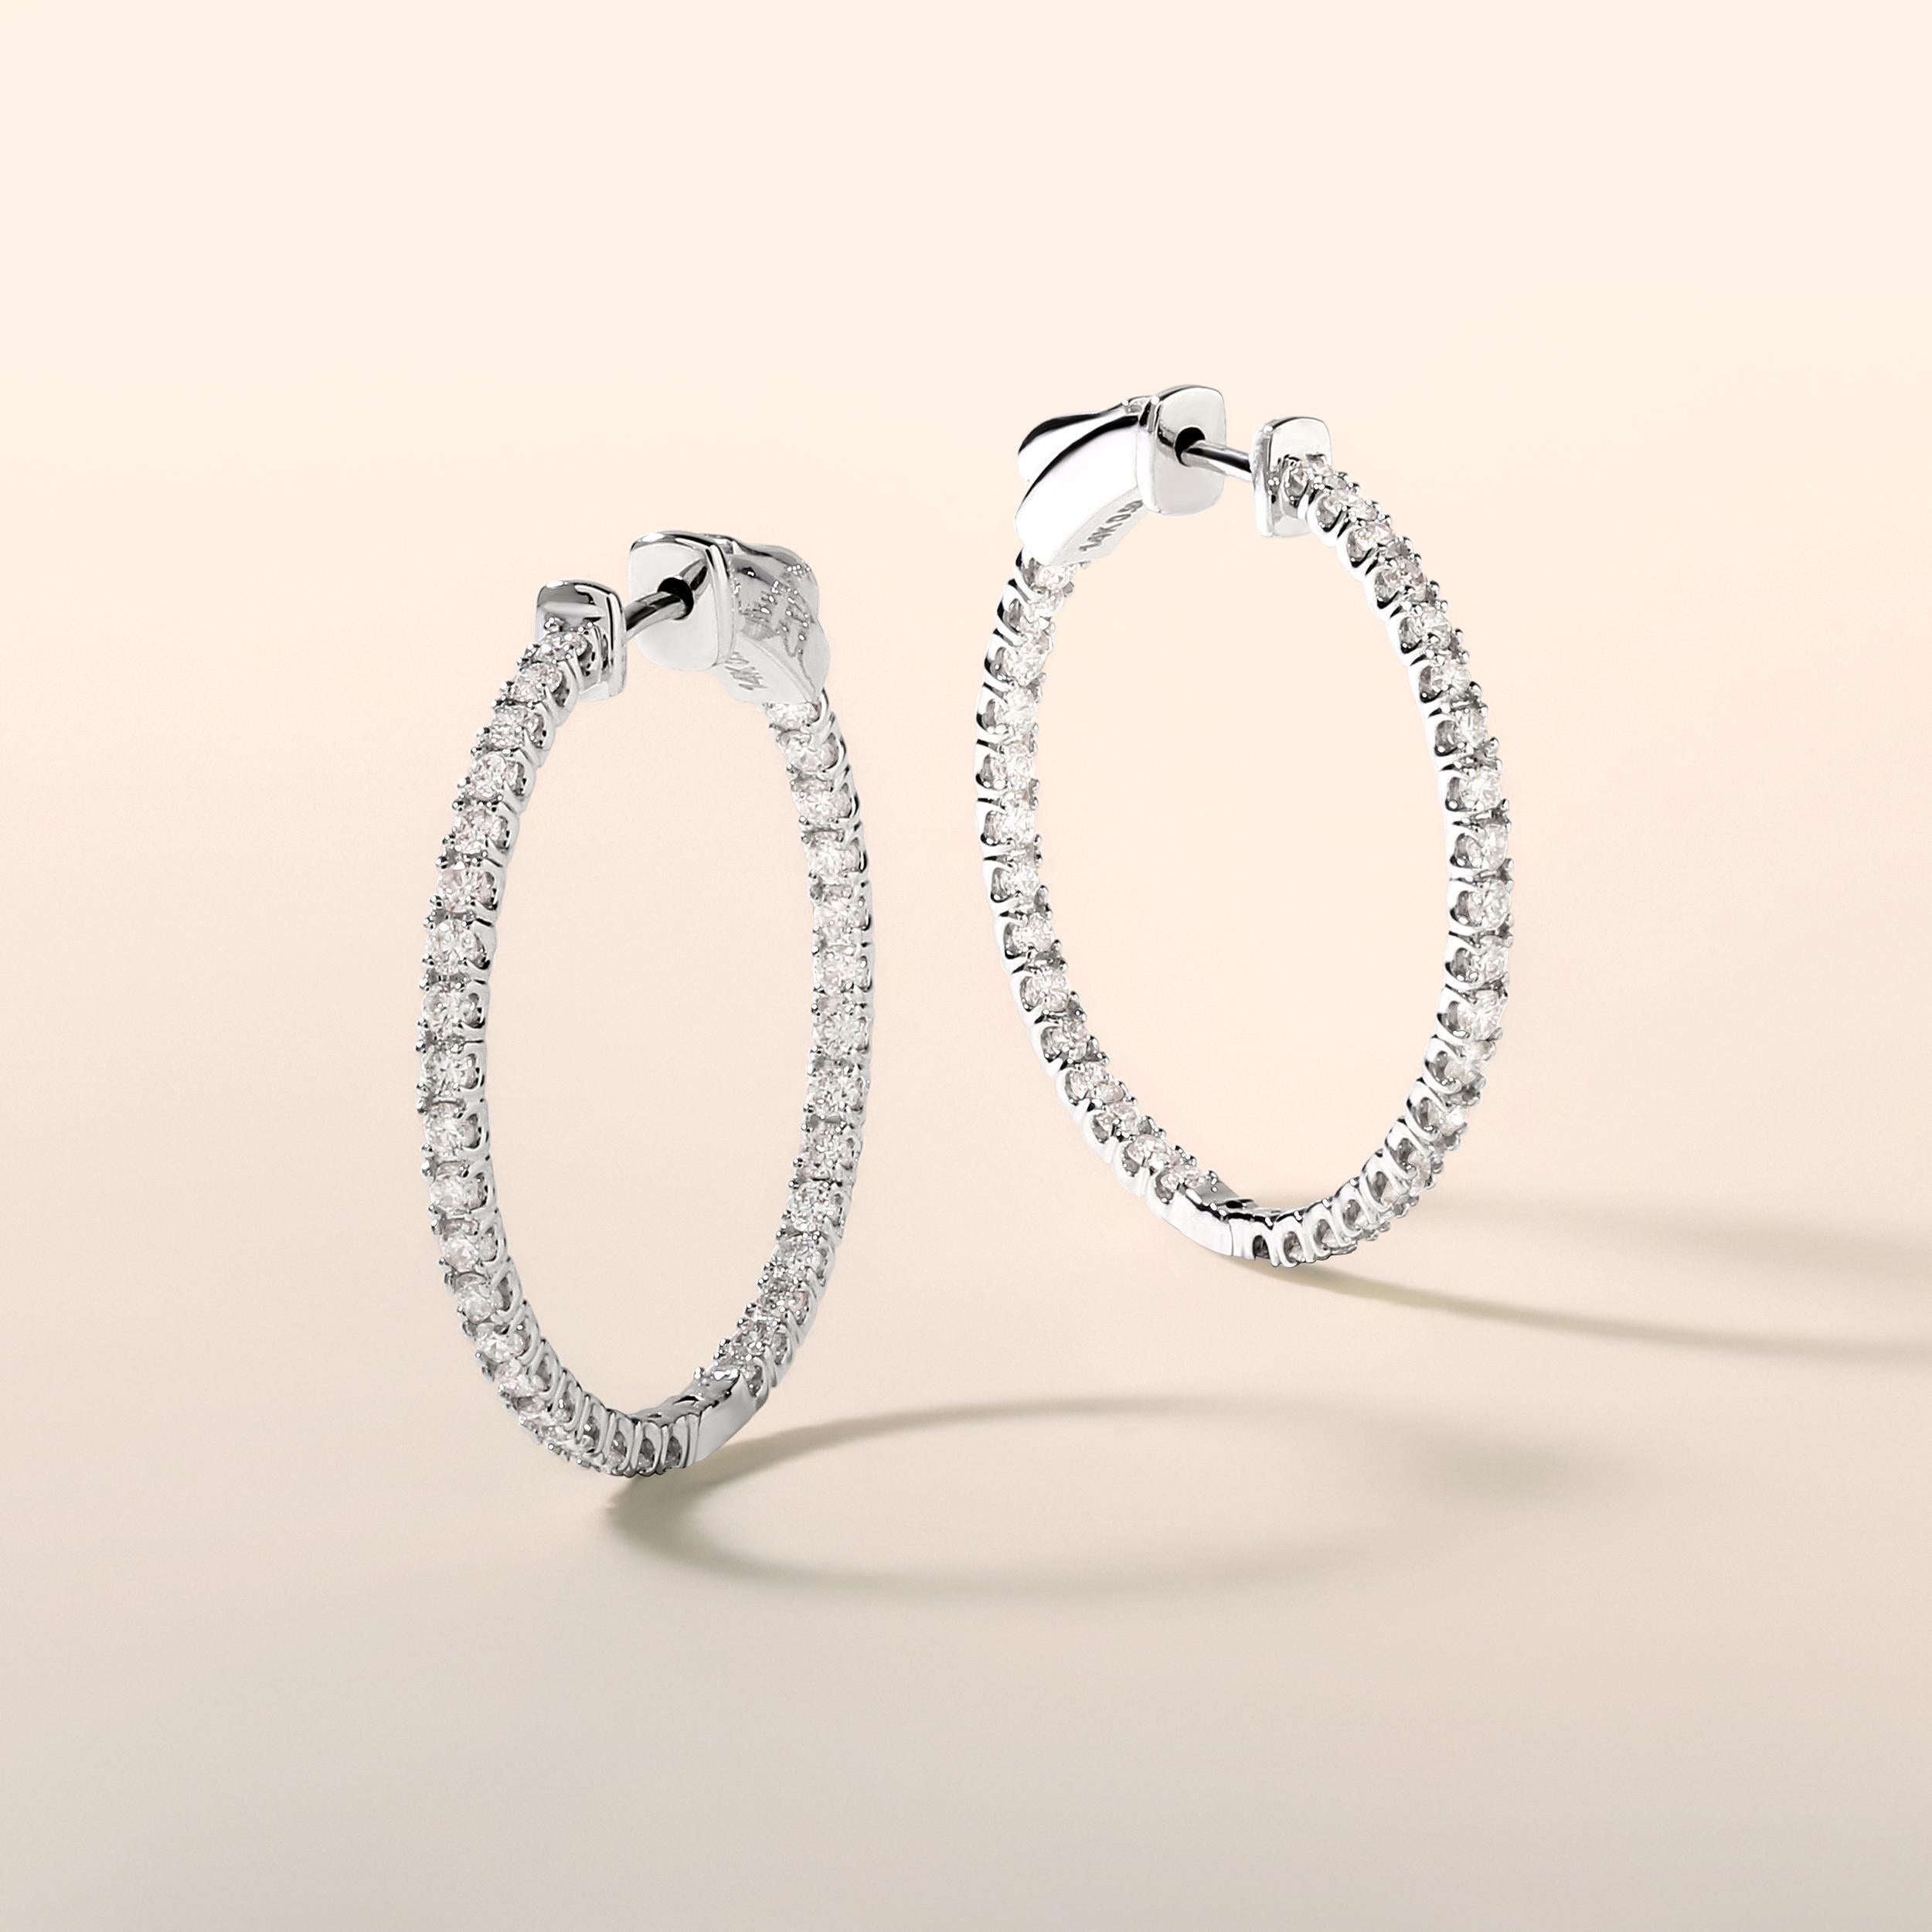 Crafted in 3.8 grams of 14K White Gold, the earrings contains 68 stones of Round Diamonds with a total of 0.98 carat in G-H color and SI clarity.

CONTEMPORARY AND TIMELESS ESSENCE: Crafted in 14-karat/18-karat with 100% natural diamond and designed